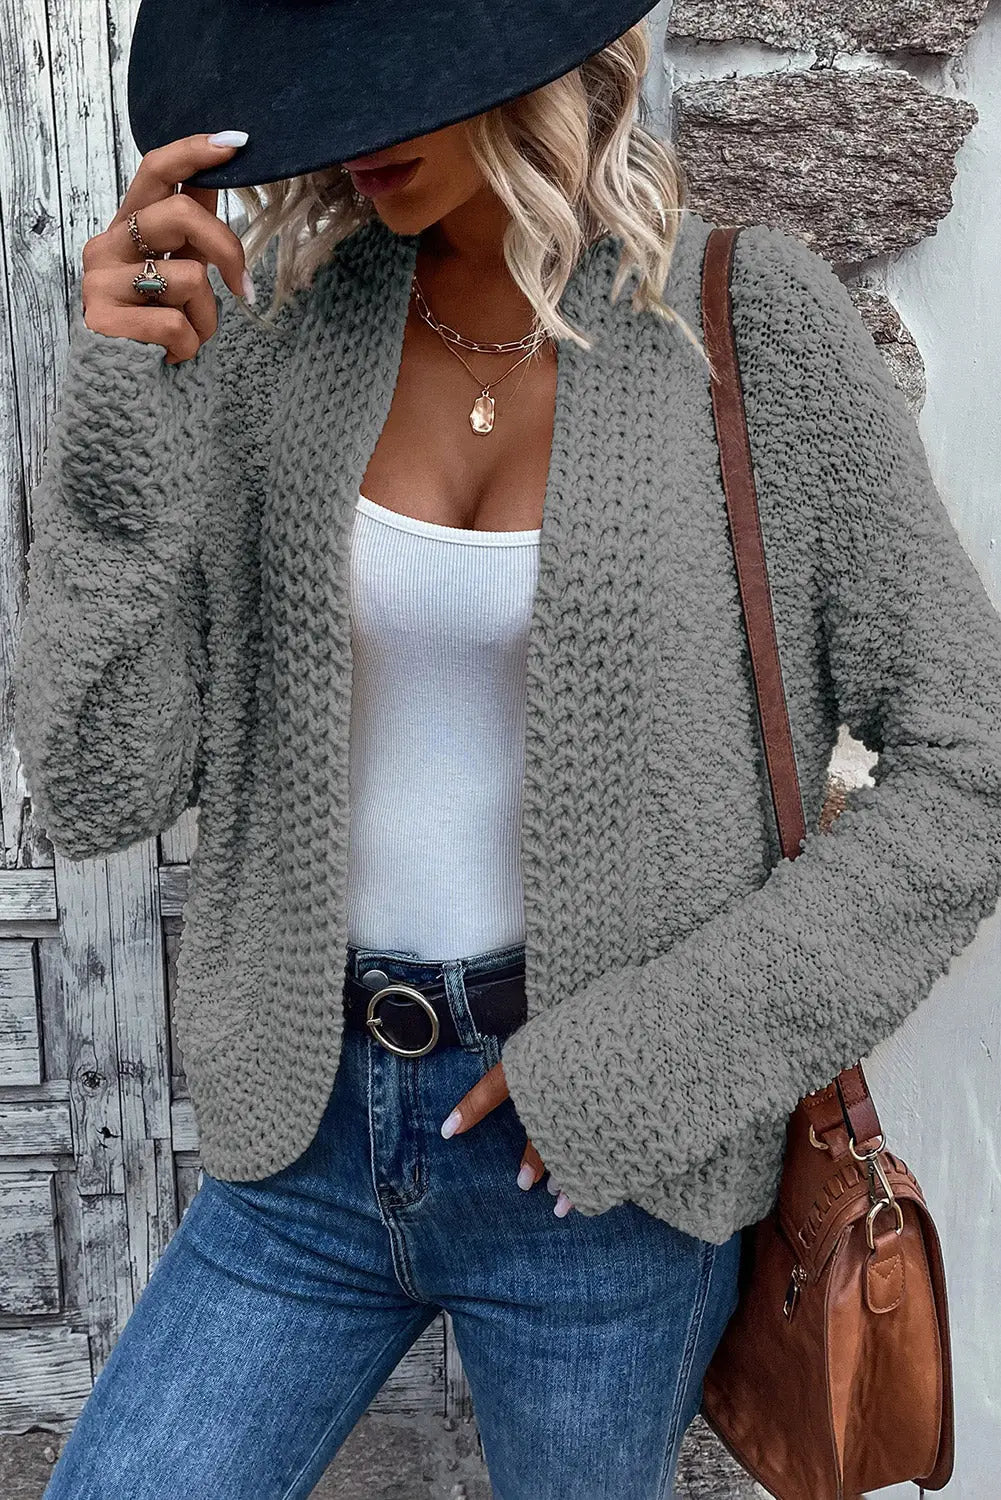 Gray popcorn knit open front cardigan - s / 100% acrylic - sweaters & cardigans